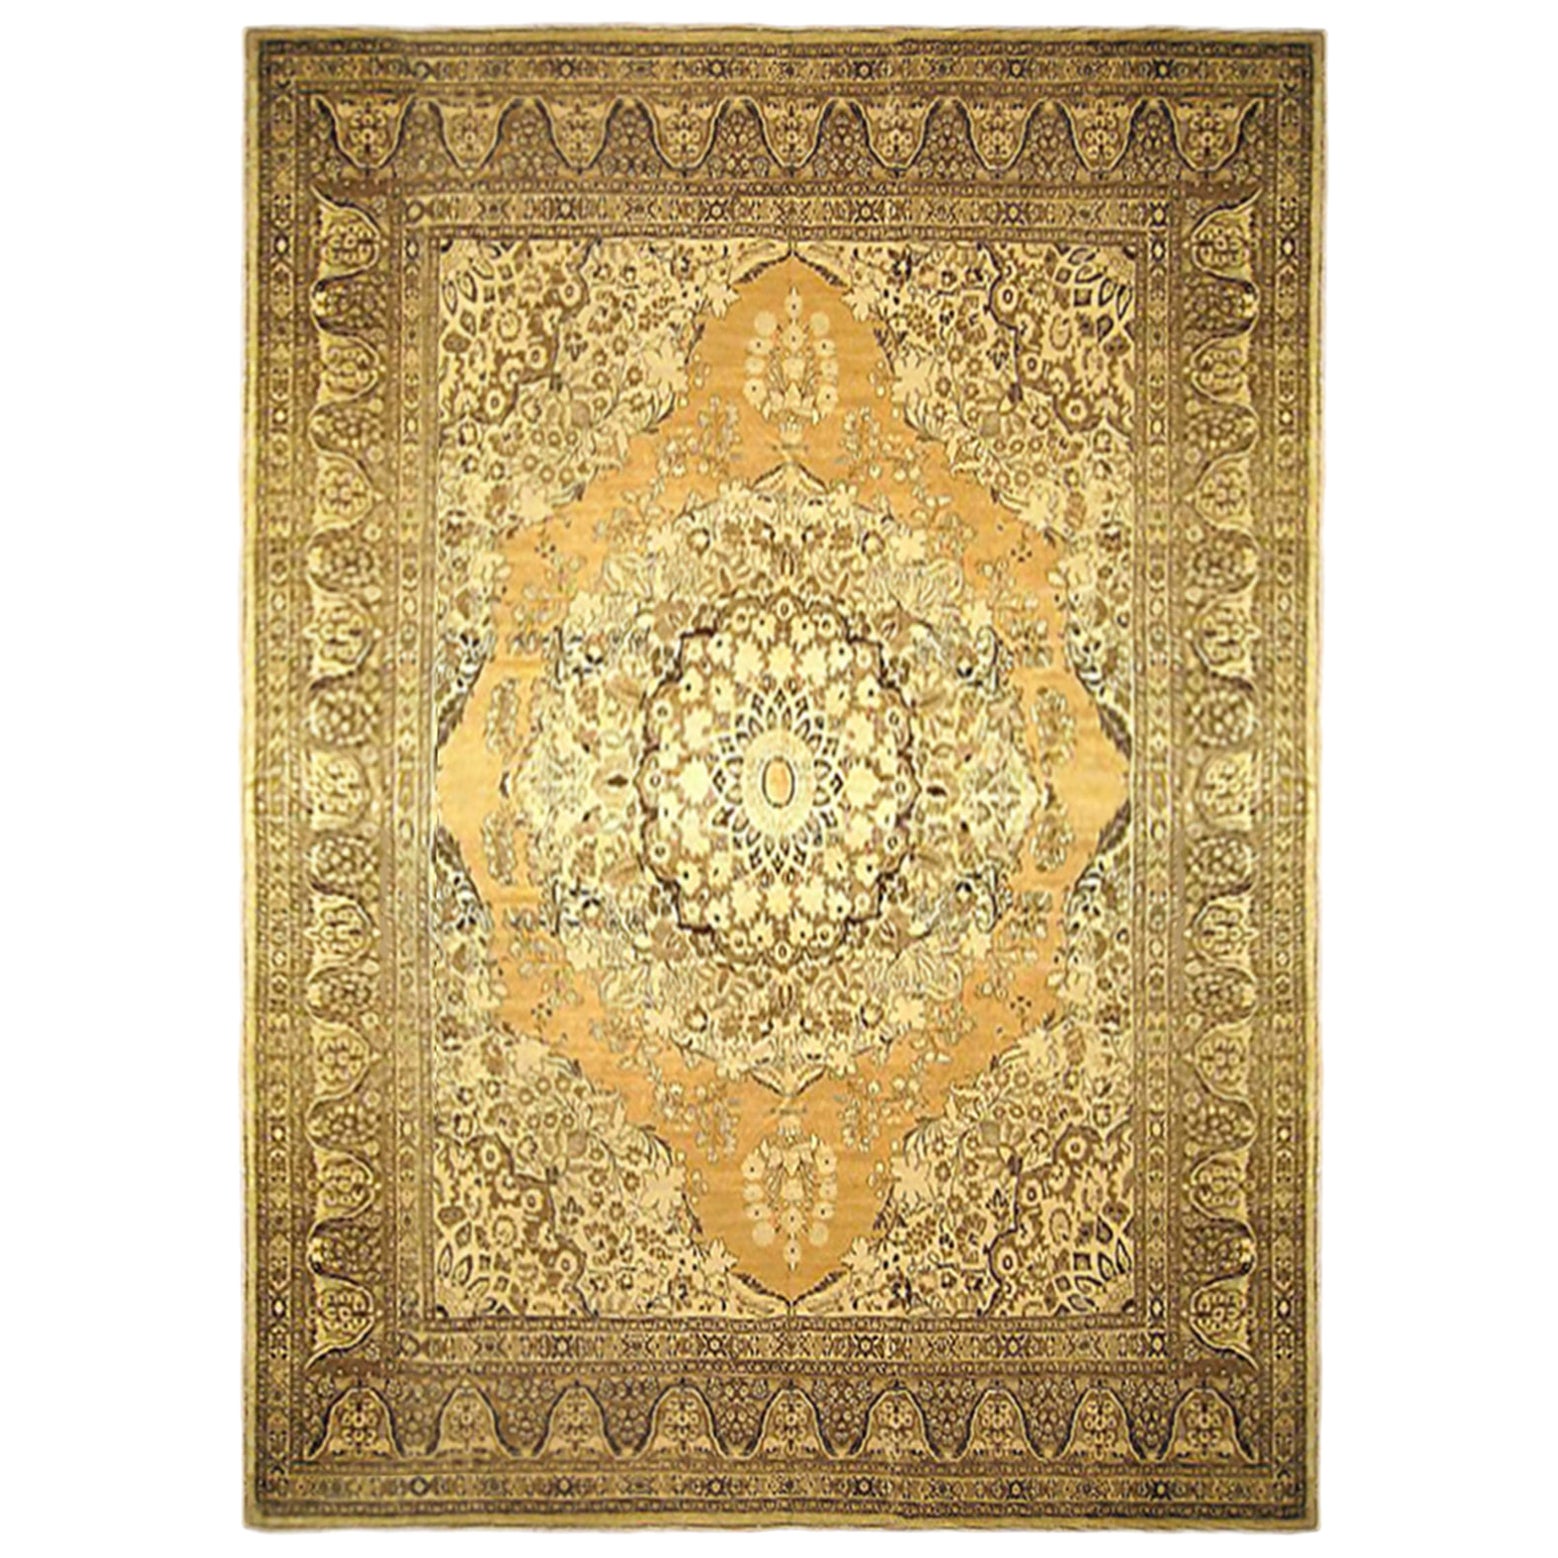 Antique Persian Tabriz Oriental Carpet in Room Size with Central Medallion For Sale